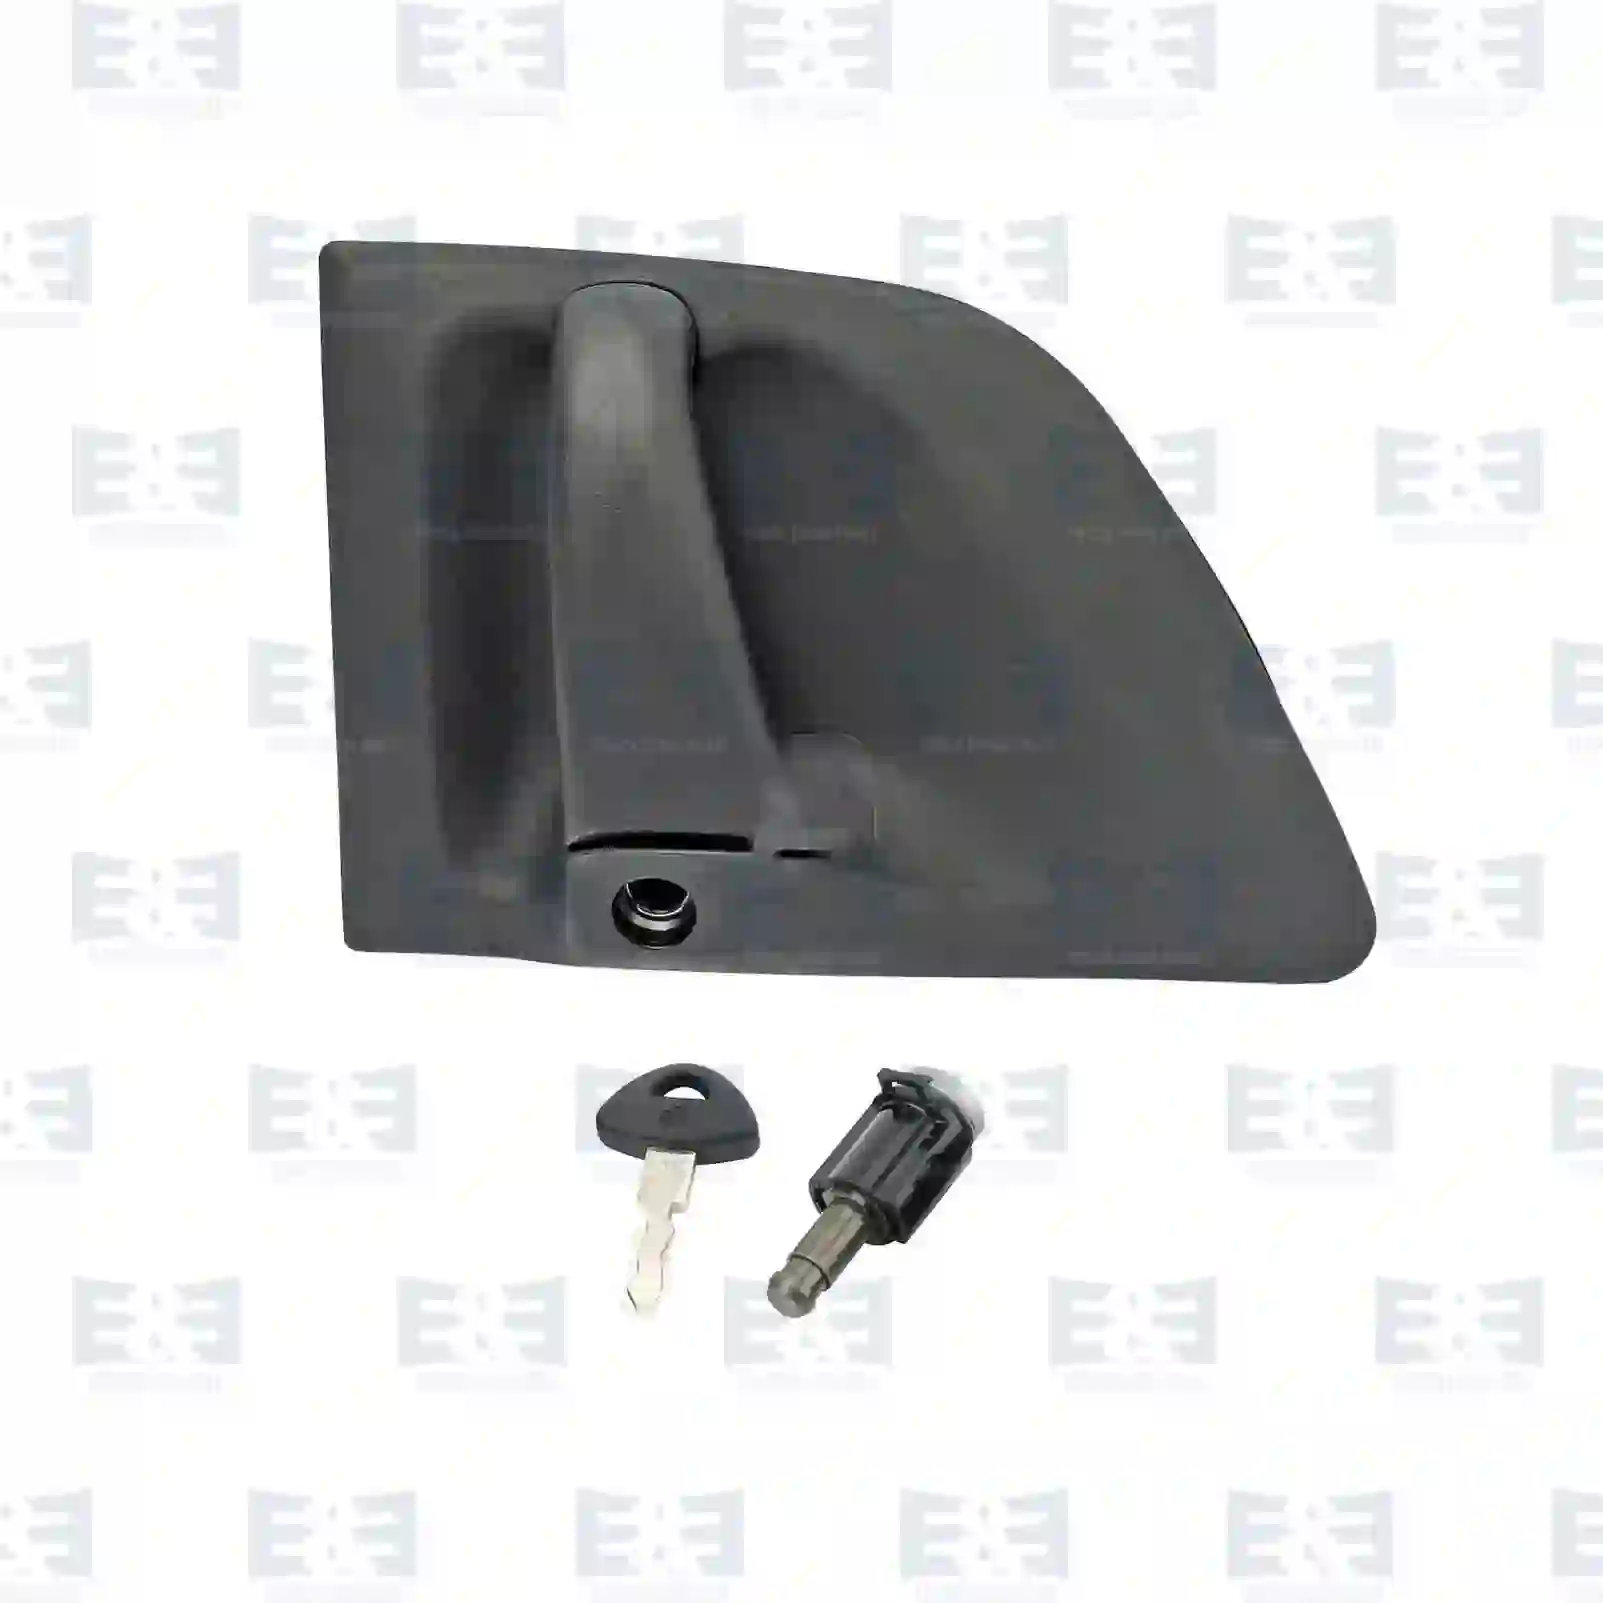 Door handle, right, complete with lock cylinder, 2E2289402, 2145648S, 2371255S, ZG60603-0008 ||  2E2289402 E&E Truck Spare Parts | Truck Spare Parts, Auotomotive Spare Parts Door handle, right, complete with lock cylinder, 2E2289402, 2145648S, 2371255S, ZG60603-0008 ||  2E2289402 E&E Truck Spare Parts | Truck Spare Parts, Auotomotive Spare Parts